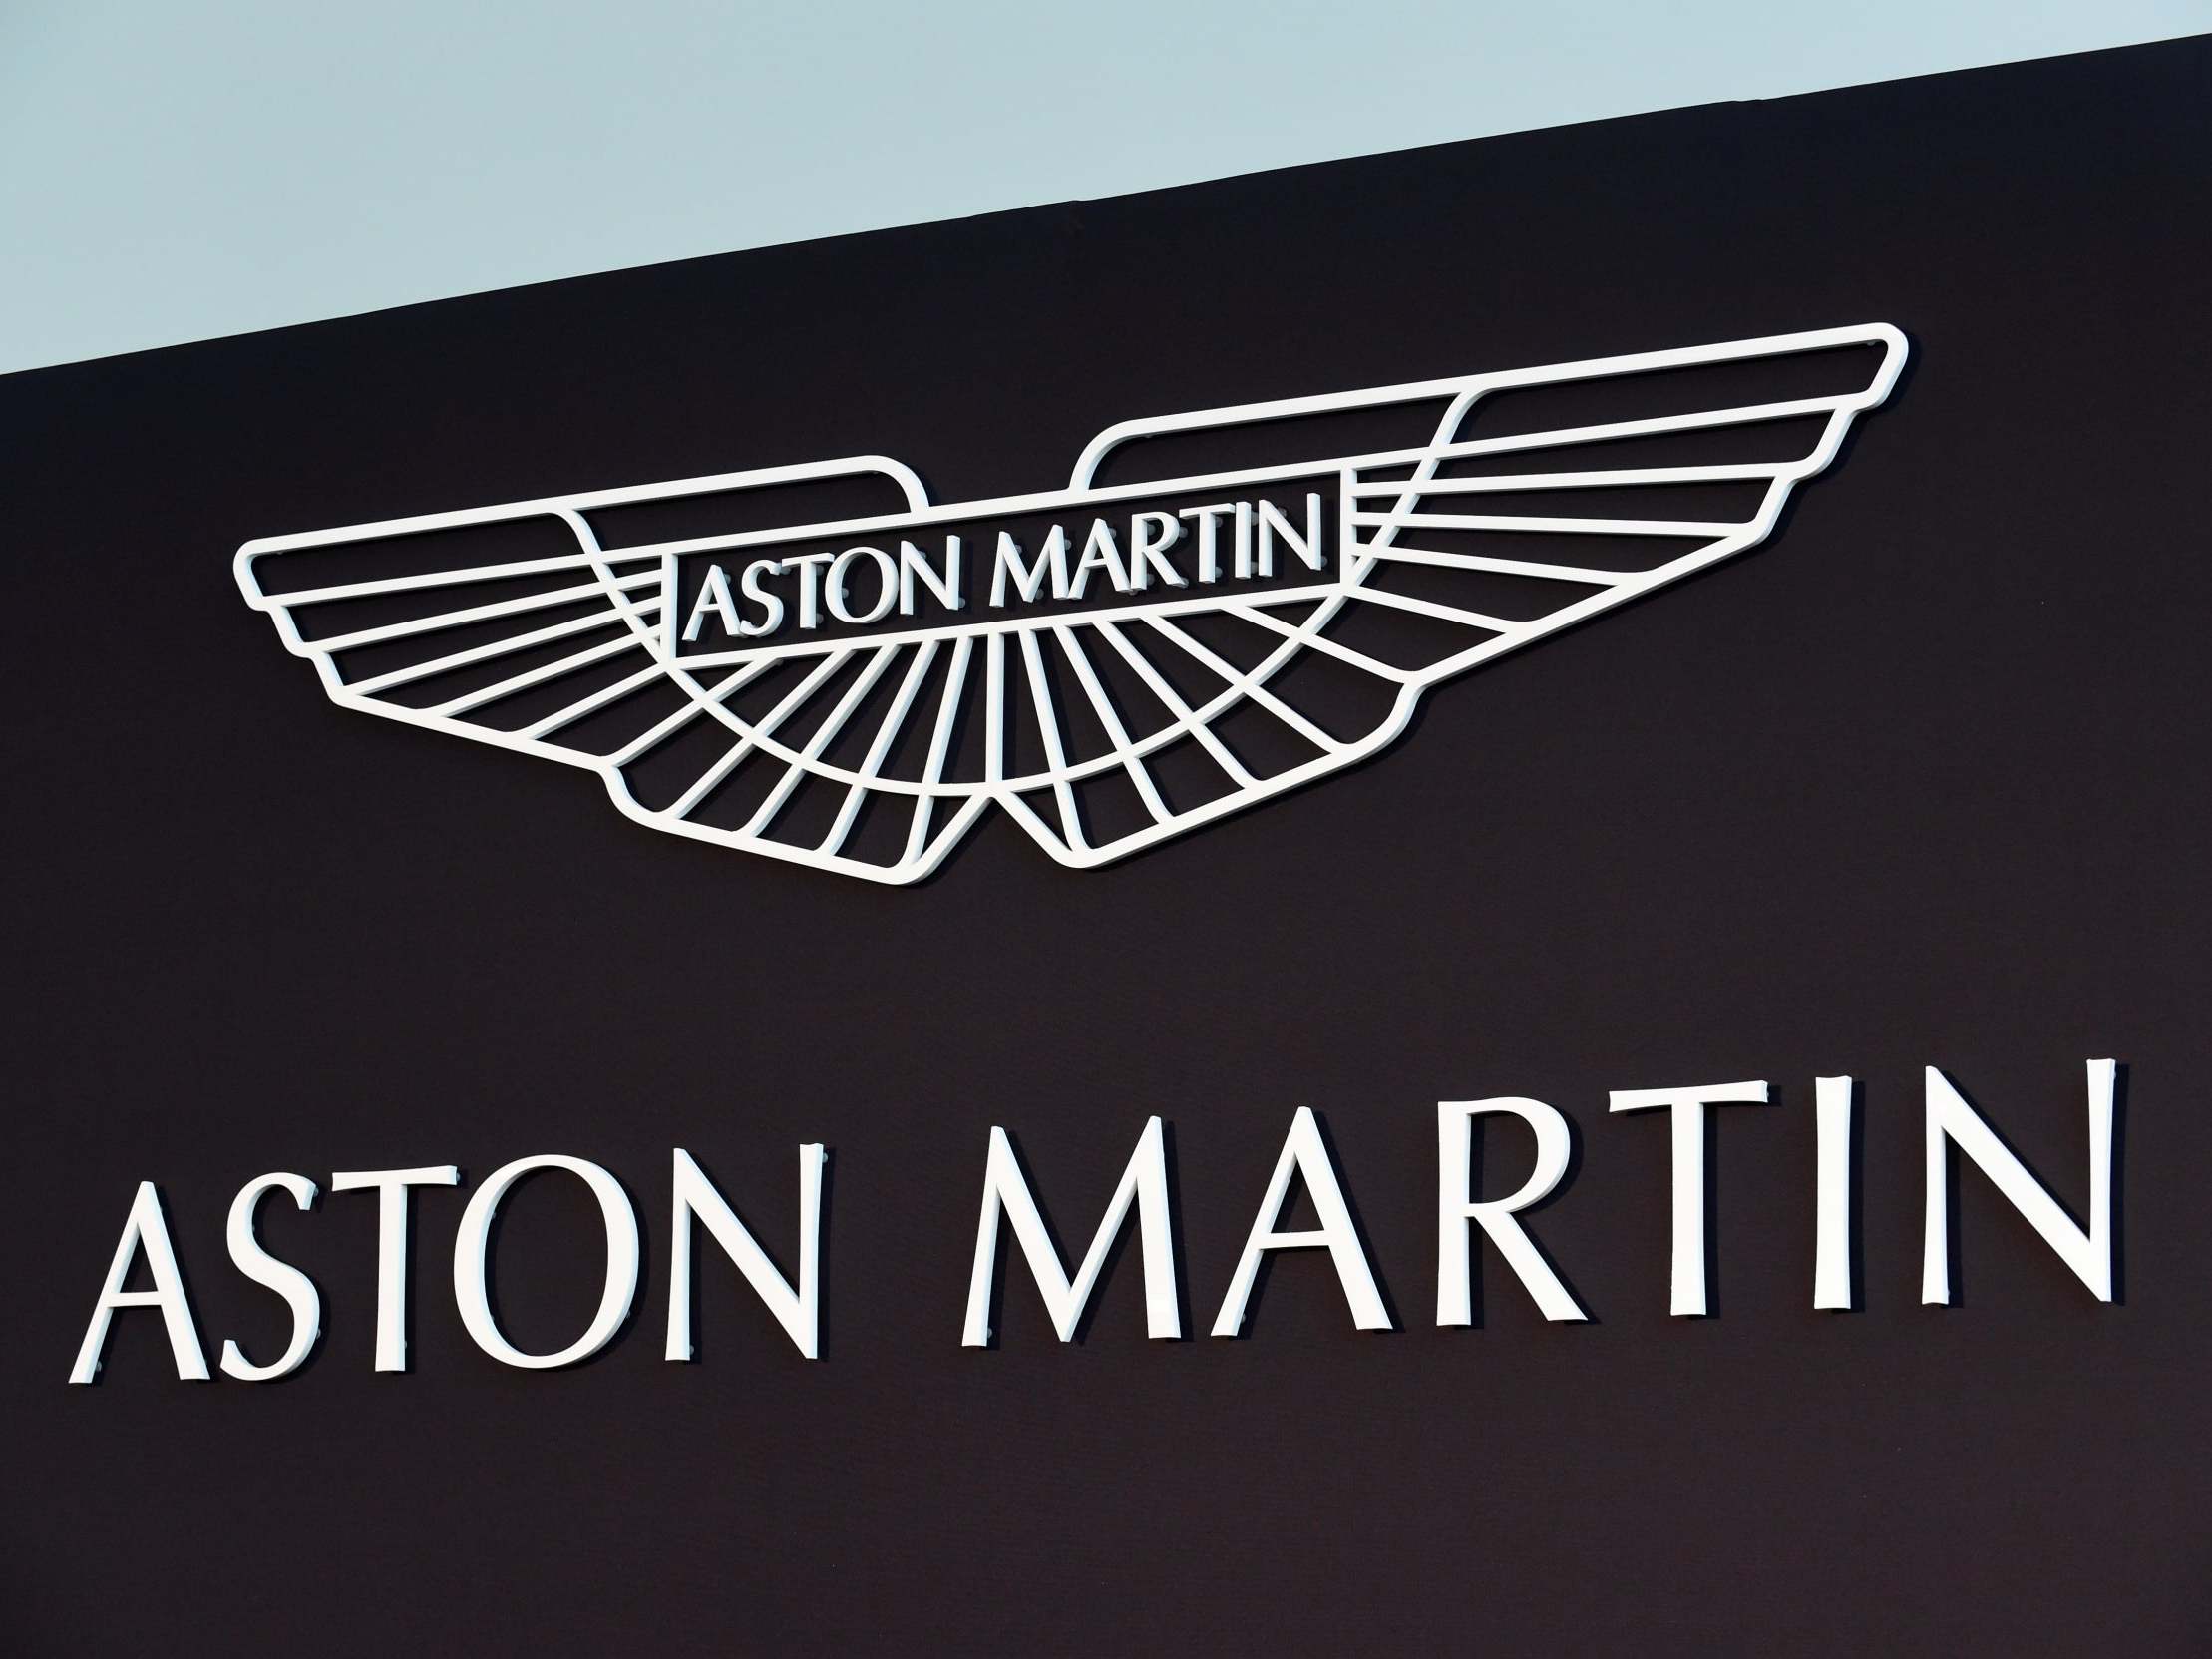 Aston Martin Racing will return to the F1 grid for the first time in 60 years